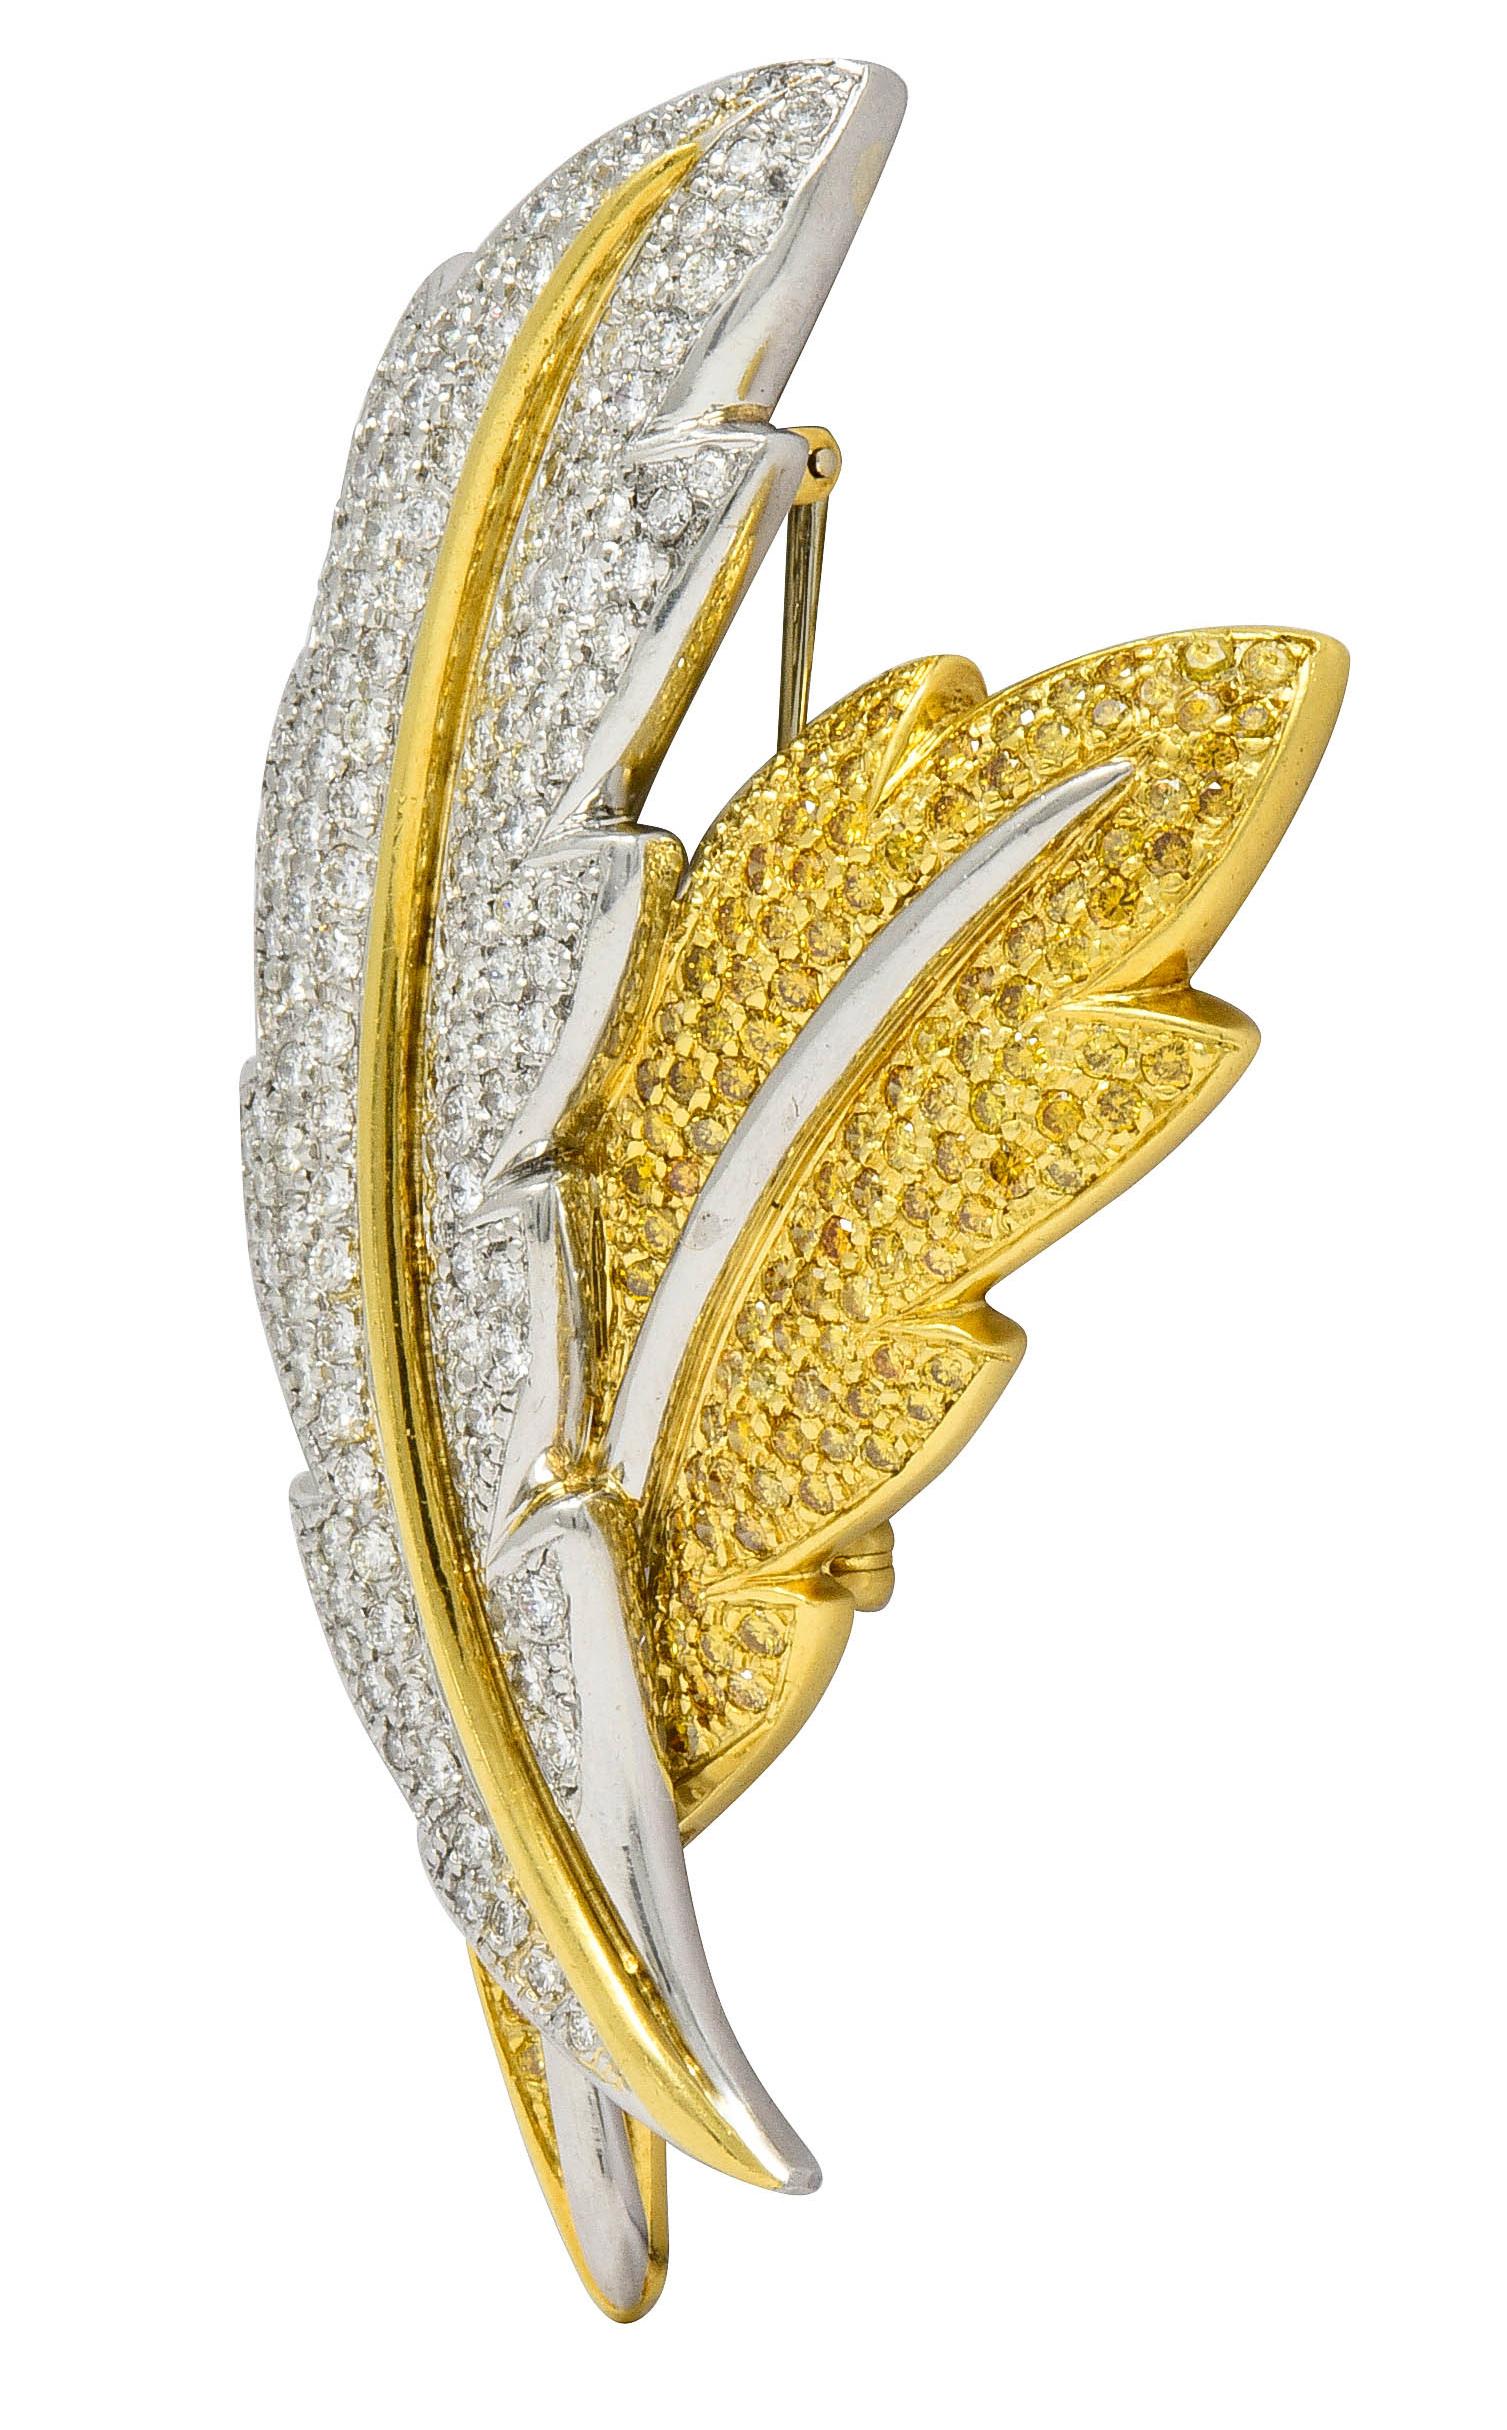 Brooch is designed as two stylized overlapping feathers with brightly polished stems of platinum and gold

Top feather is platinum and pavè set throughout by round brilliant cut diamonds weighing approximately 4.50 carats; G to I color with SI